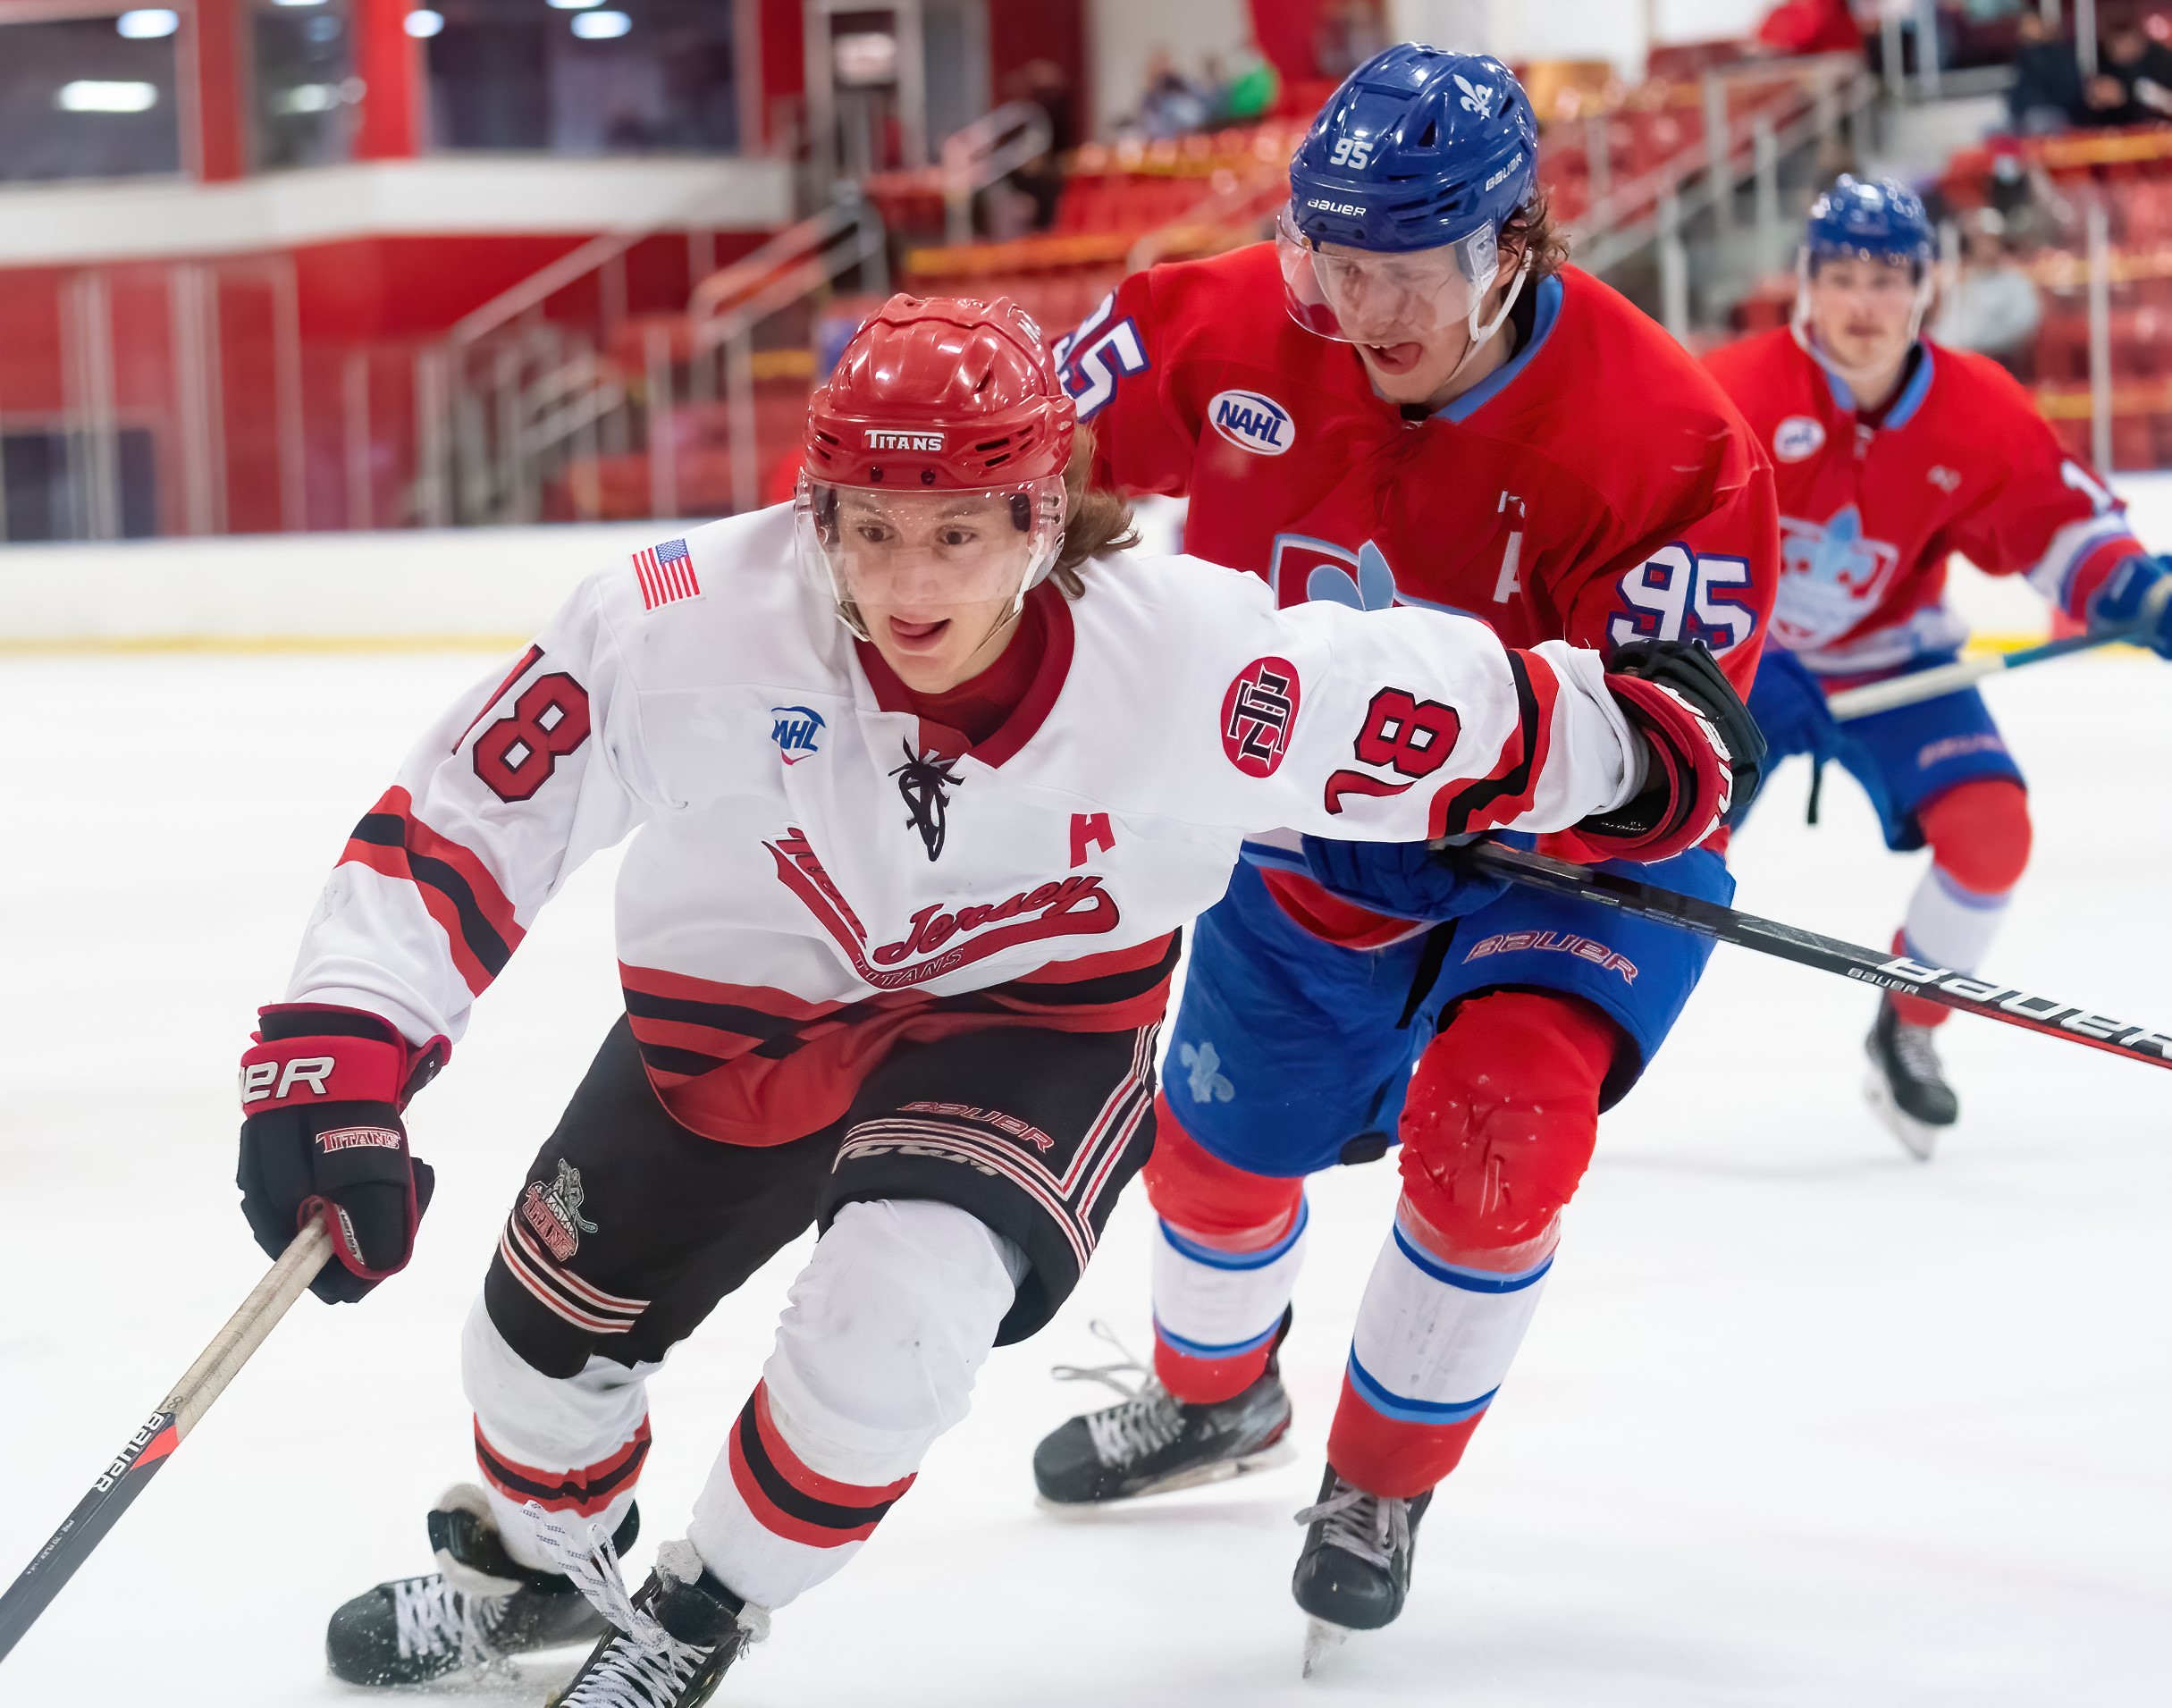 Titans fall to Nordiques 3 – 0 in hard fought game